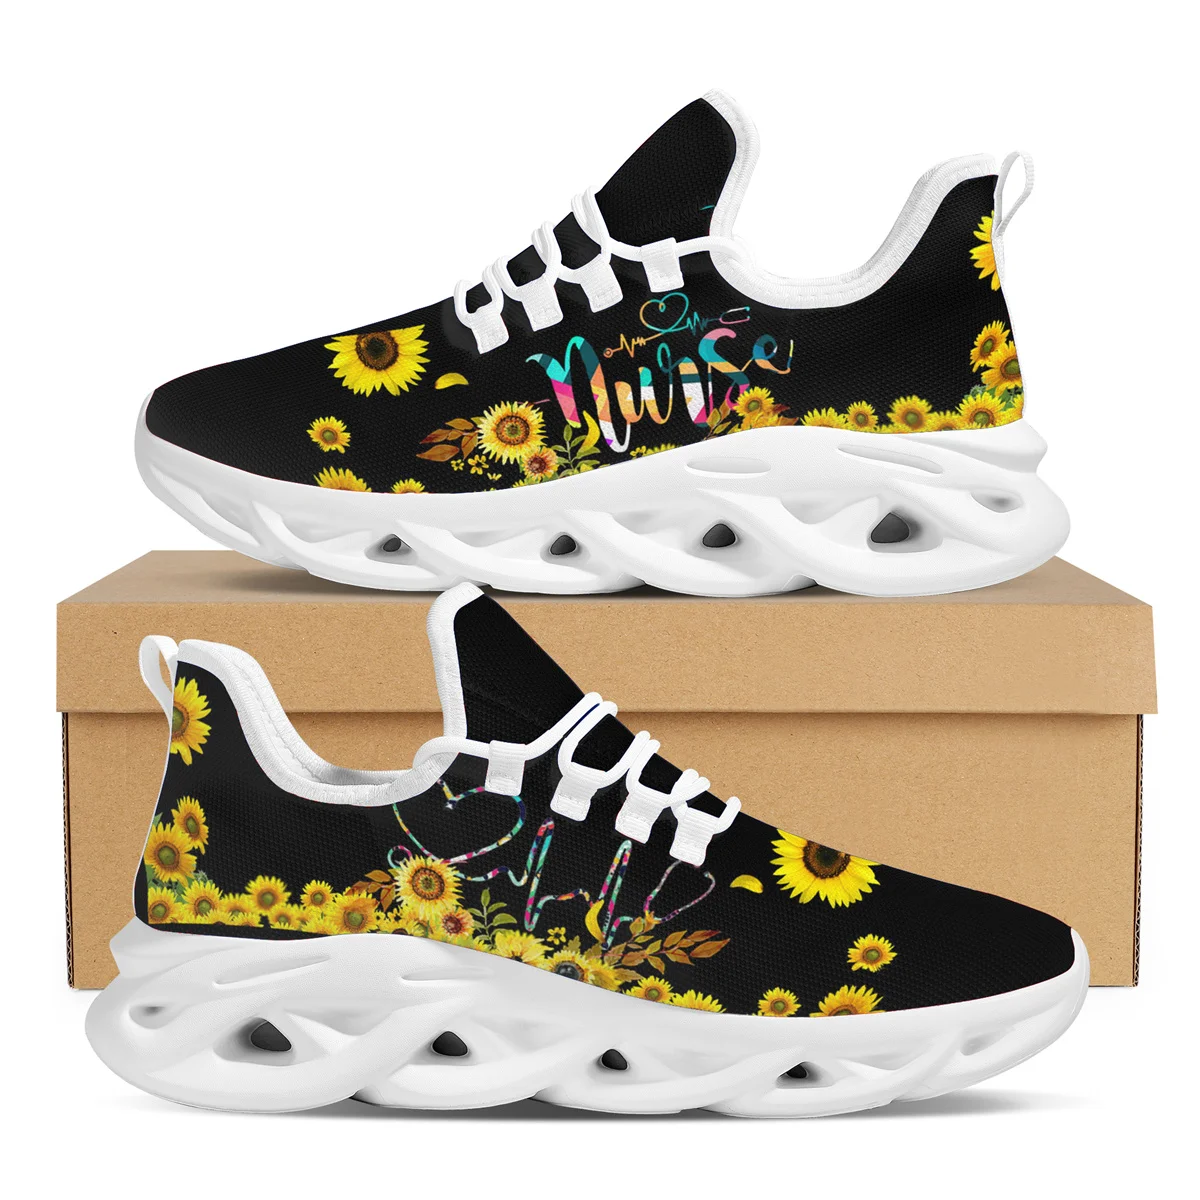 

Doginthehole New Ladies Walking Shoes Sunflower Print Design Sneakers Teen Girls Lightweight Lace Up Casual Shoes Zapatos Mujer